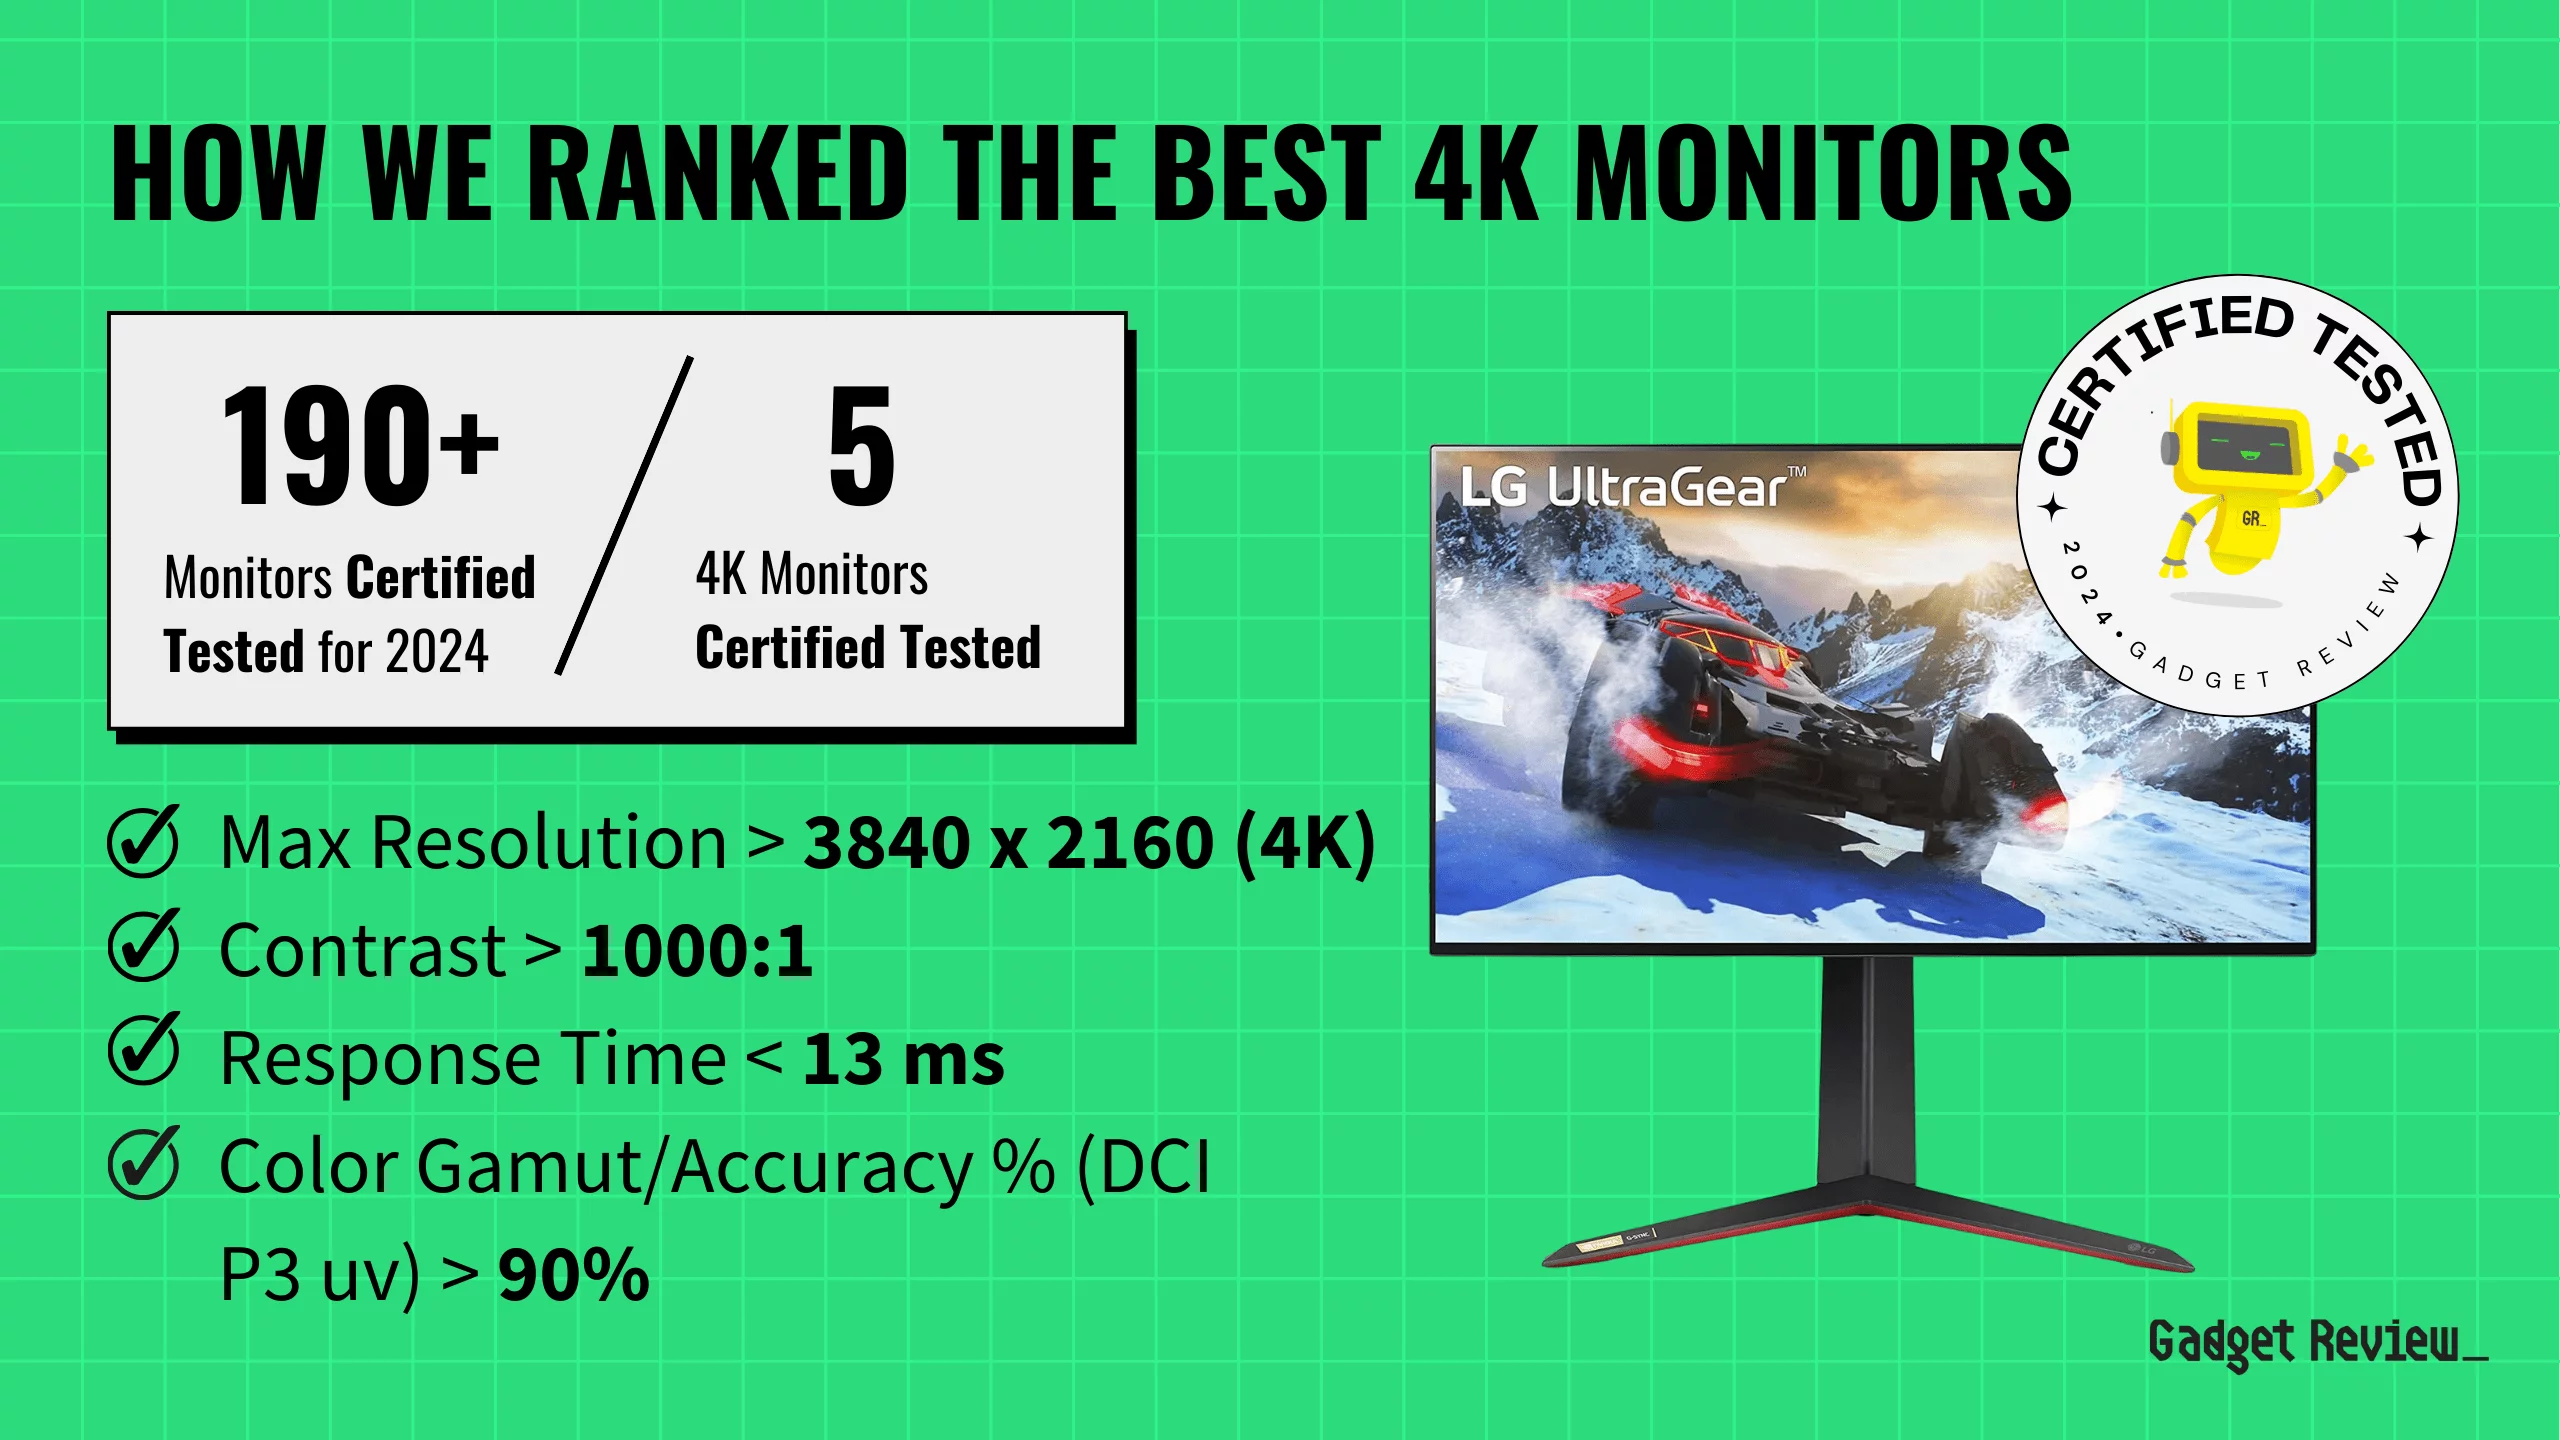 What Are The 5 Top 4K Monitors?